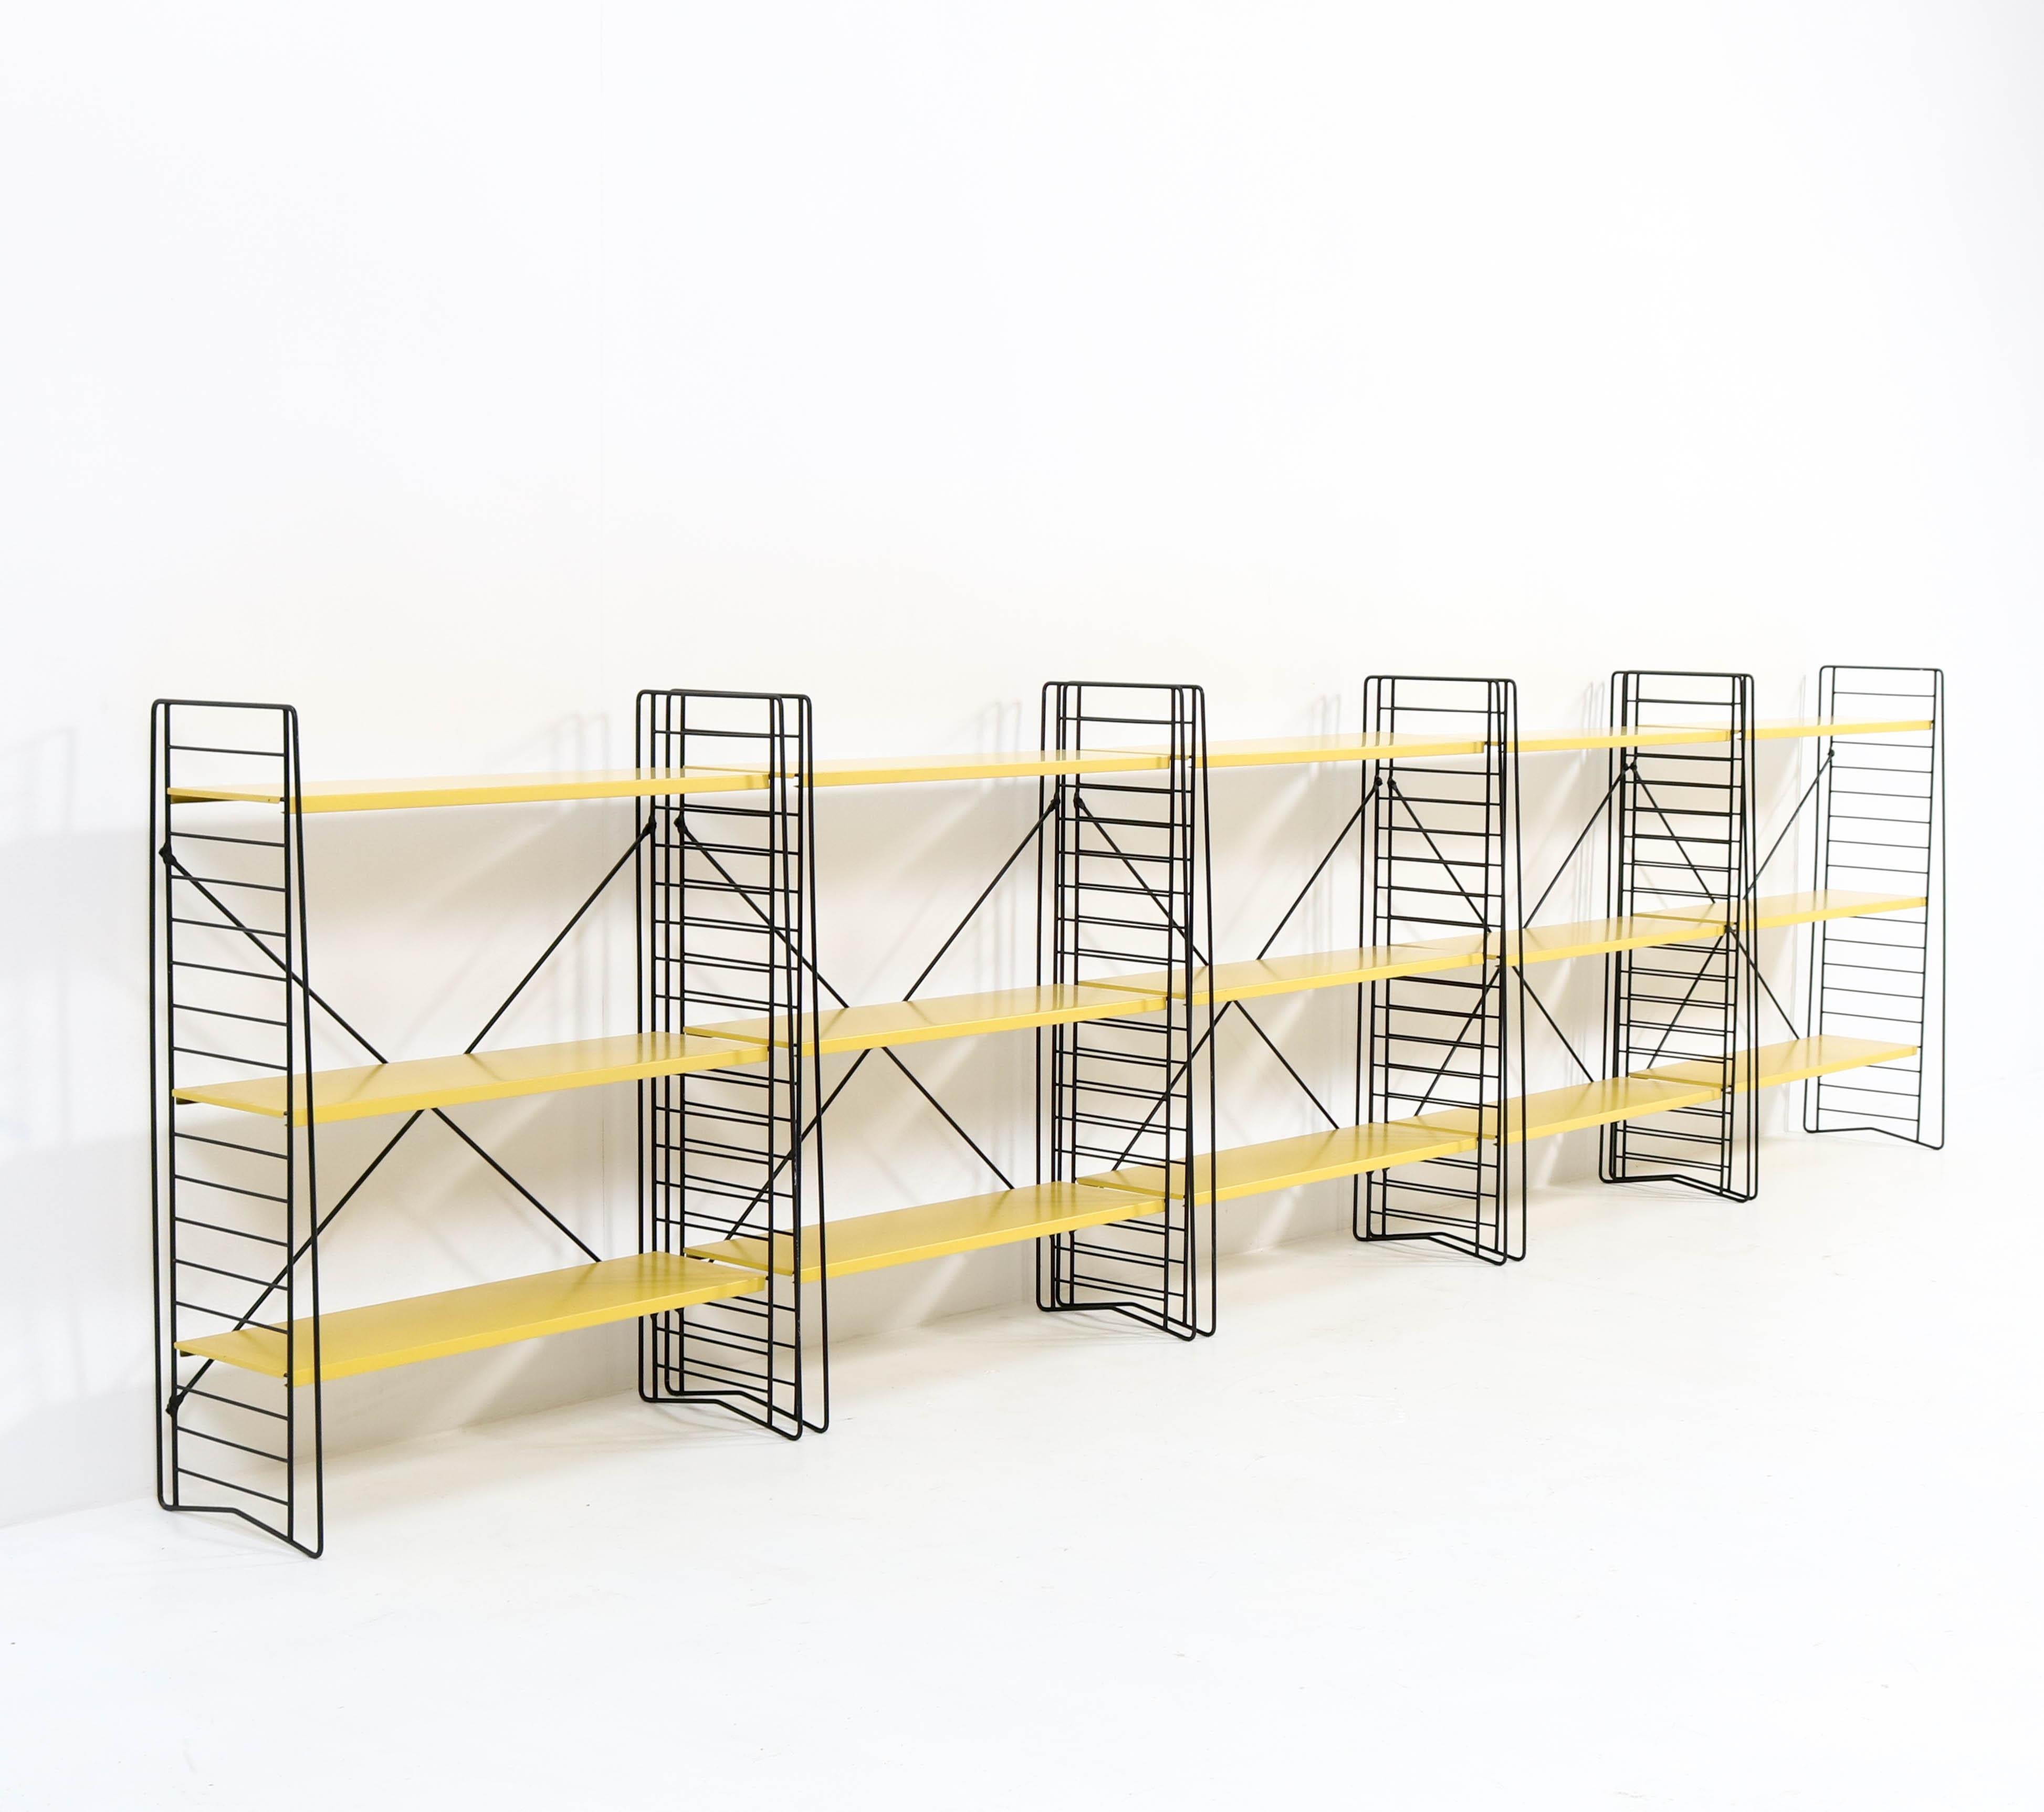 Wonderful set of five Mid-Century Modern three section standing bookshelves.
Design by Jan van der Togt for Tomado.
Striking Dutch design from the 1960s.
Original black lacquered metal frames with original yellow lacquered shelves.
All shelves